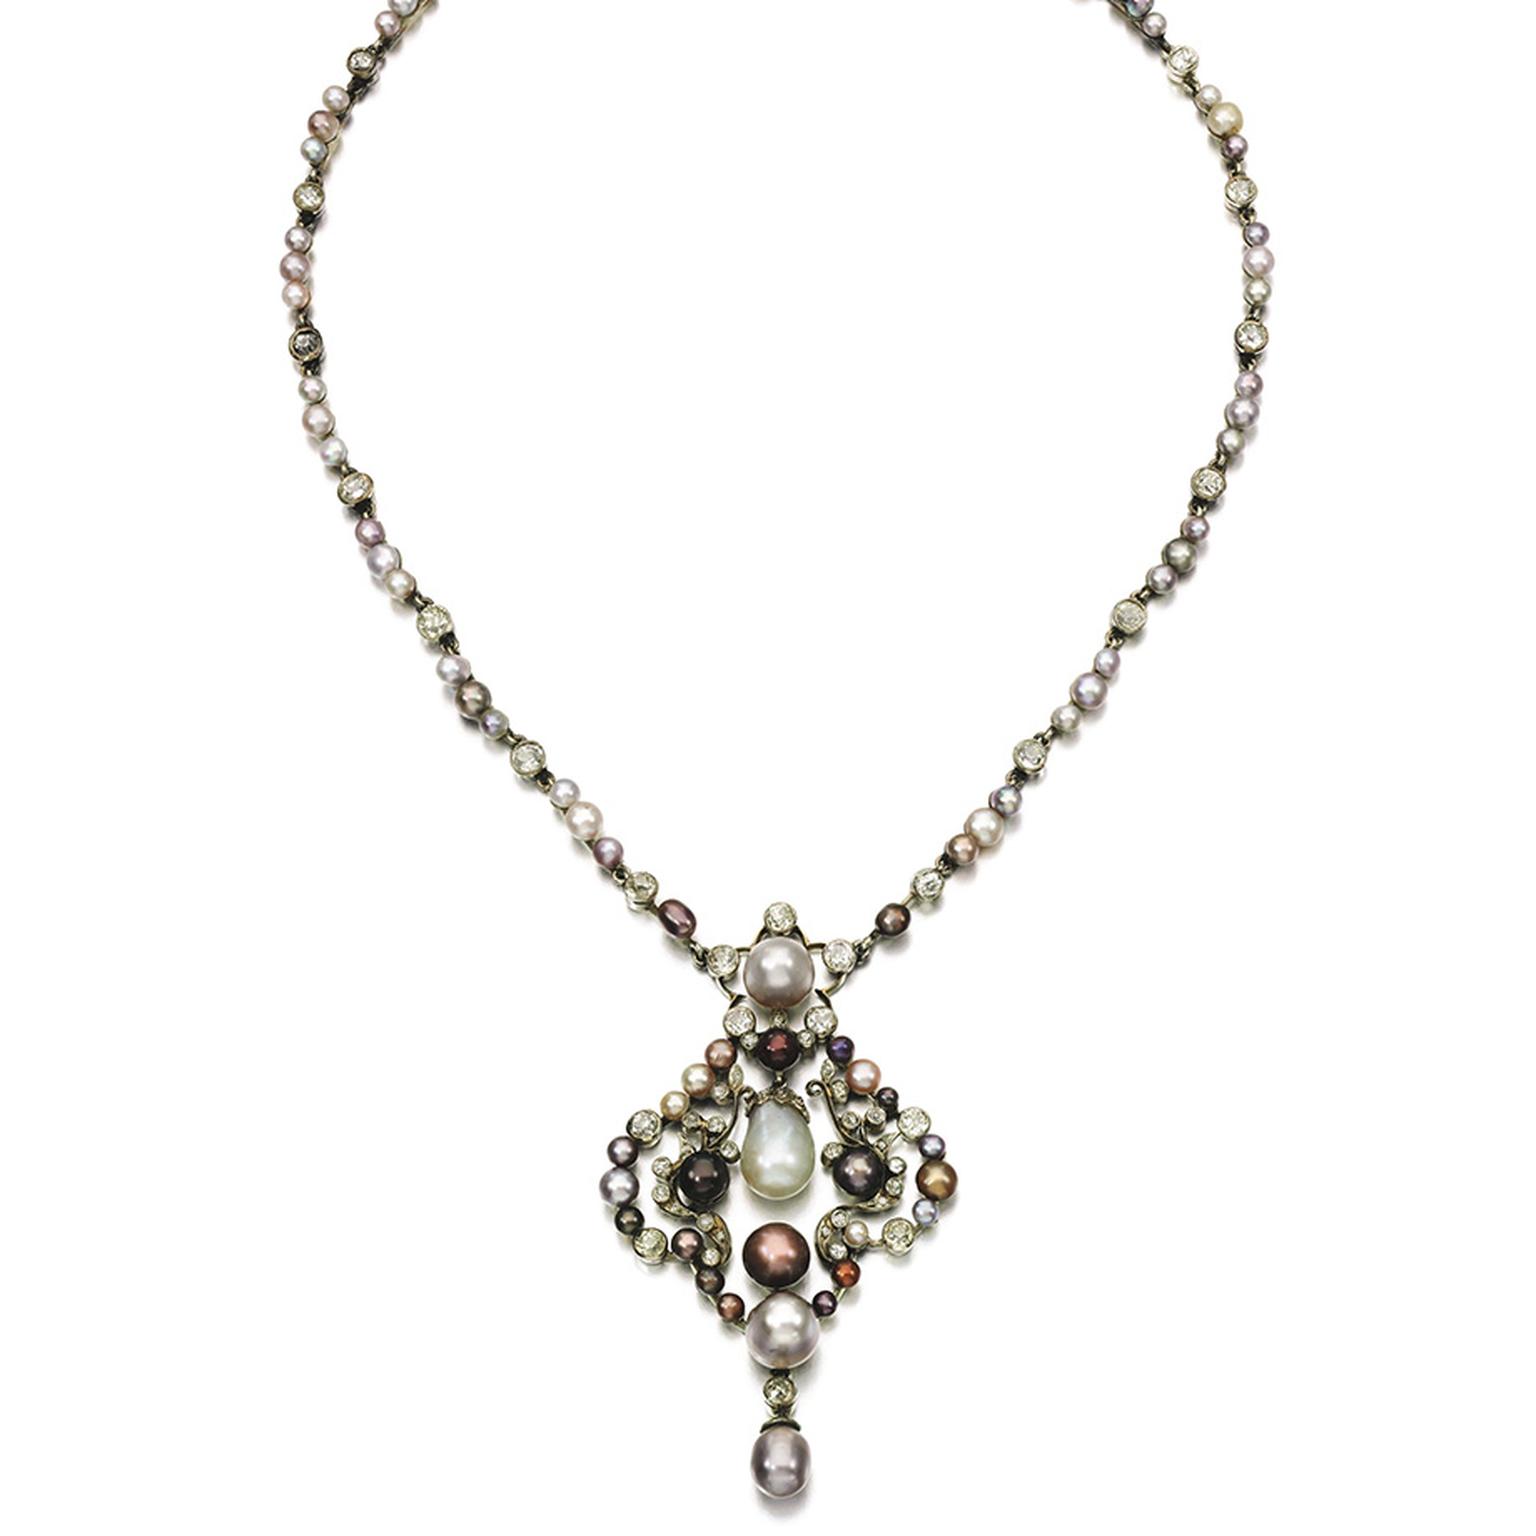 Lot 296, a late 19th century coloured, natural pearl and diamond necklace (estimate: £30,000-50,000; unsold)